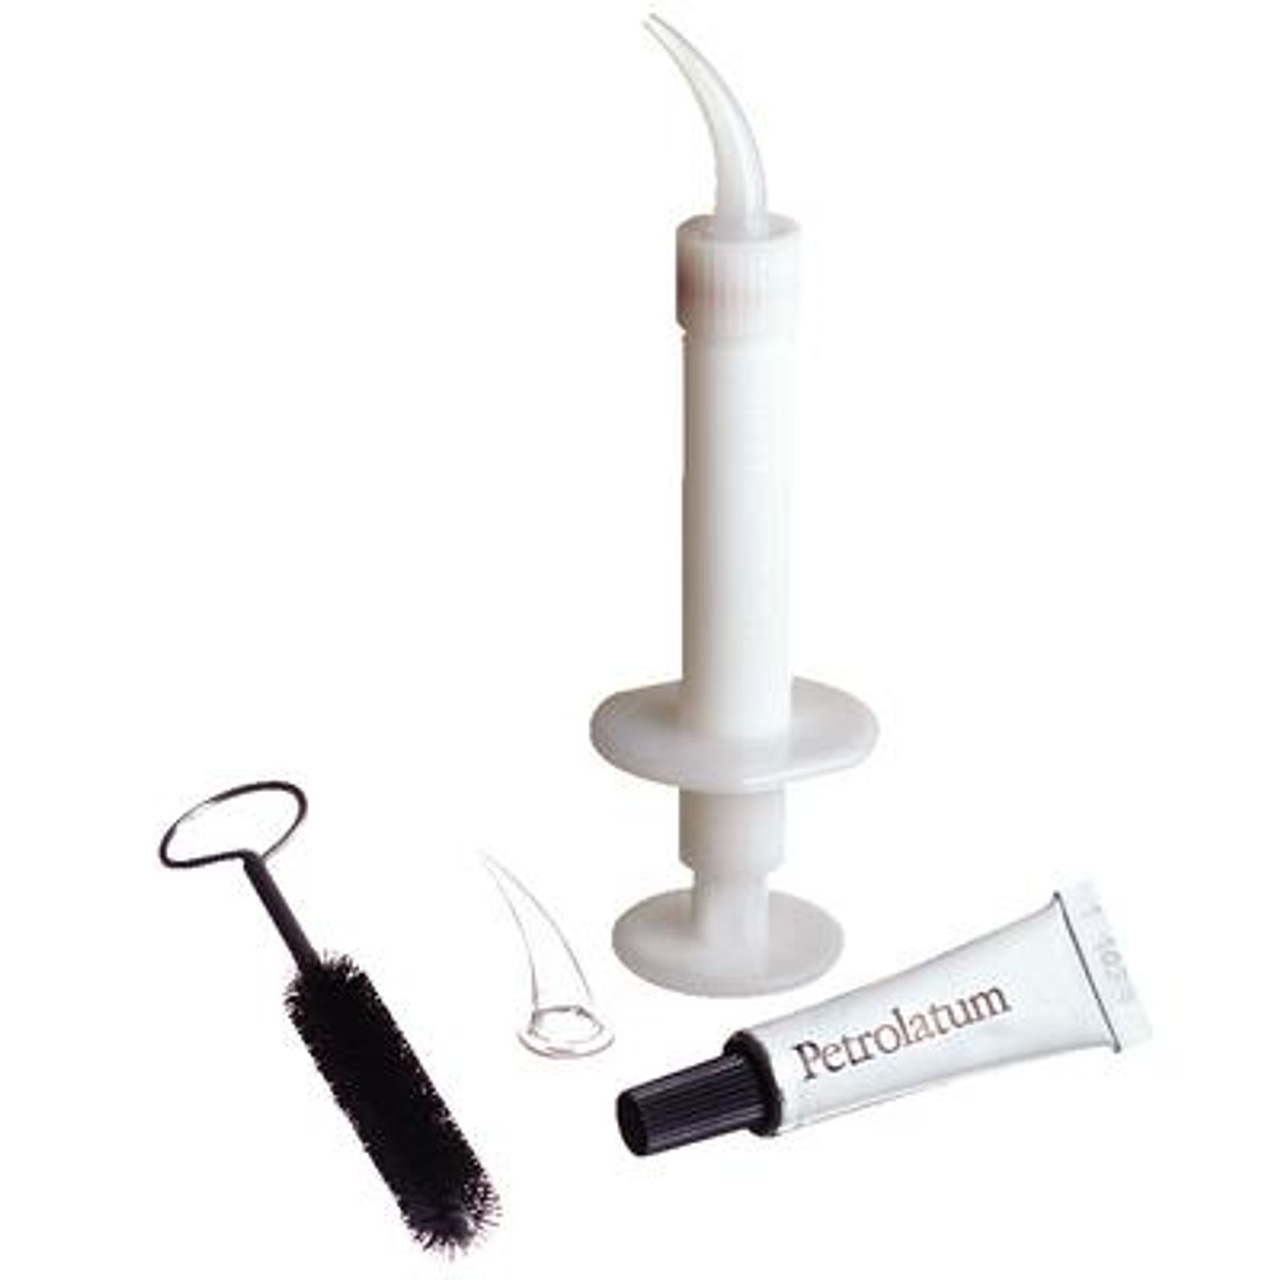 Kerr Free Flo Syringe For Use with Impression Materials